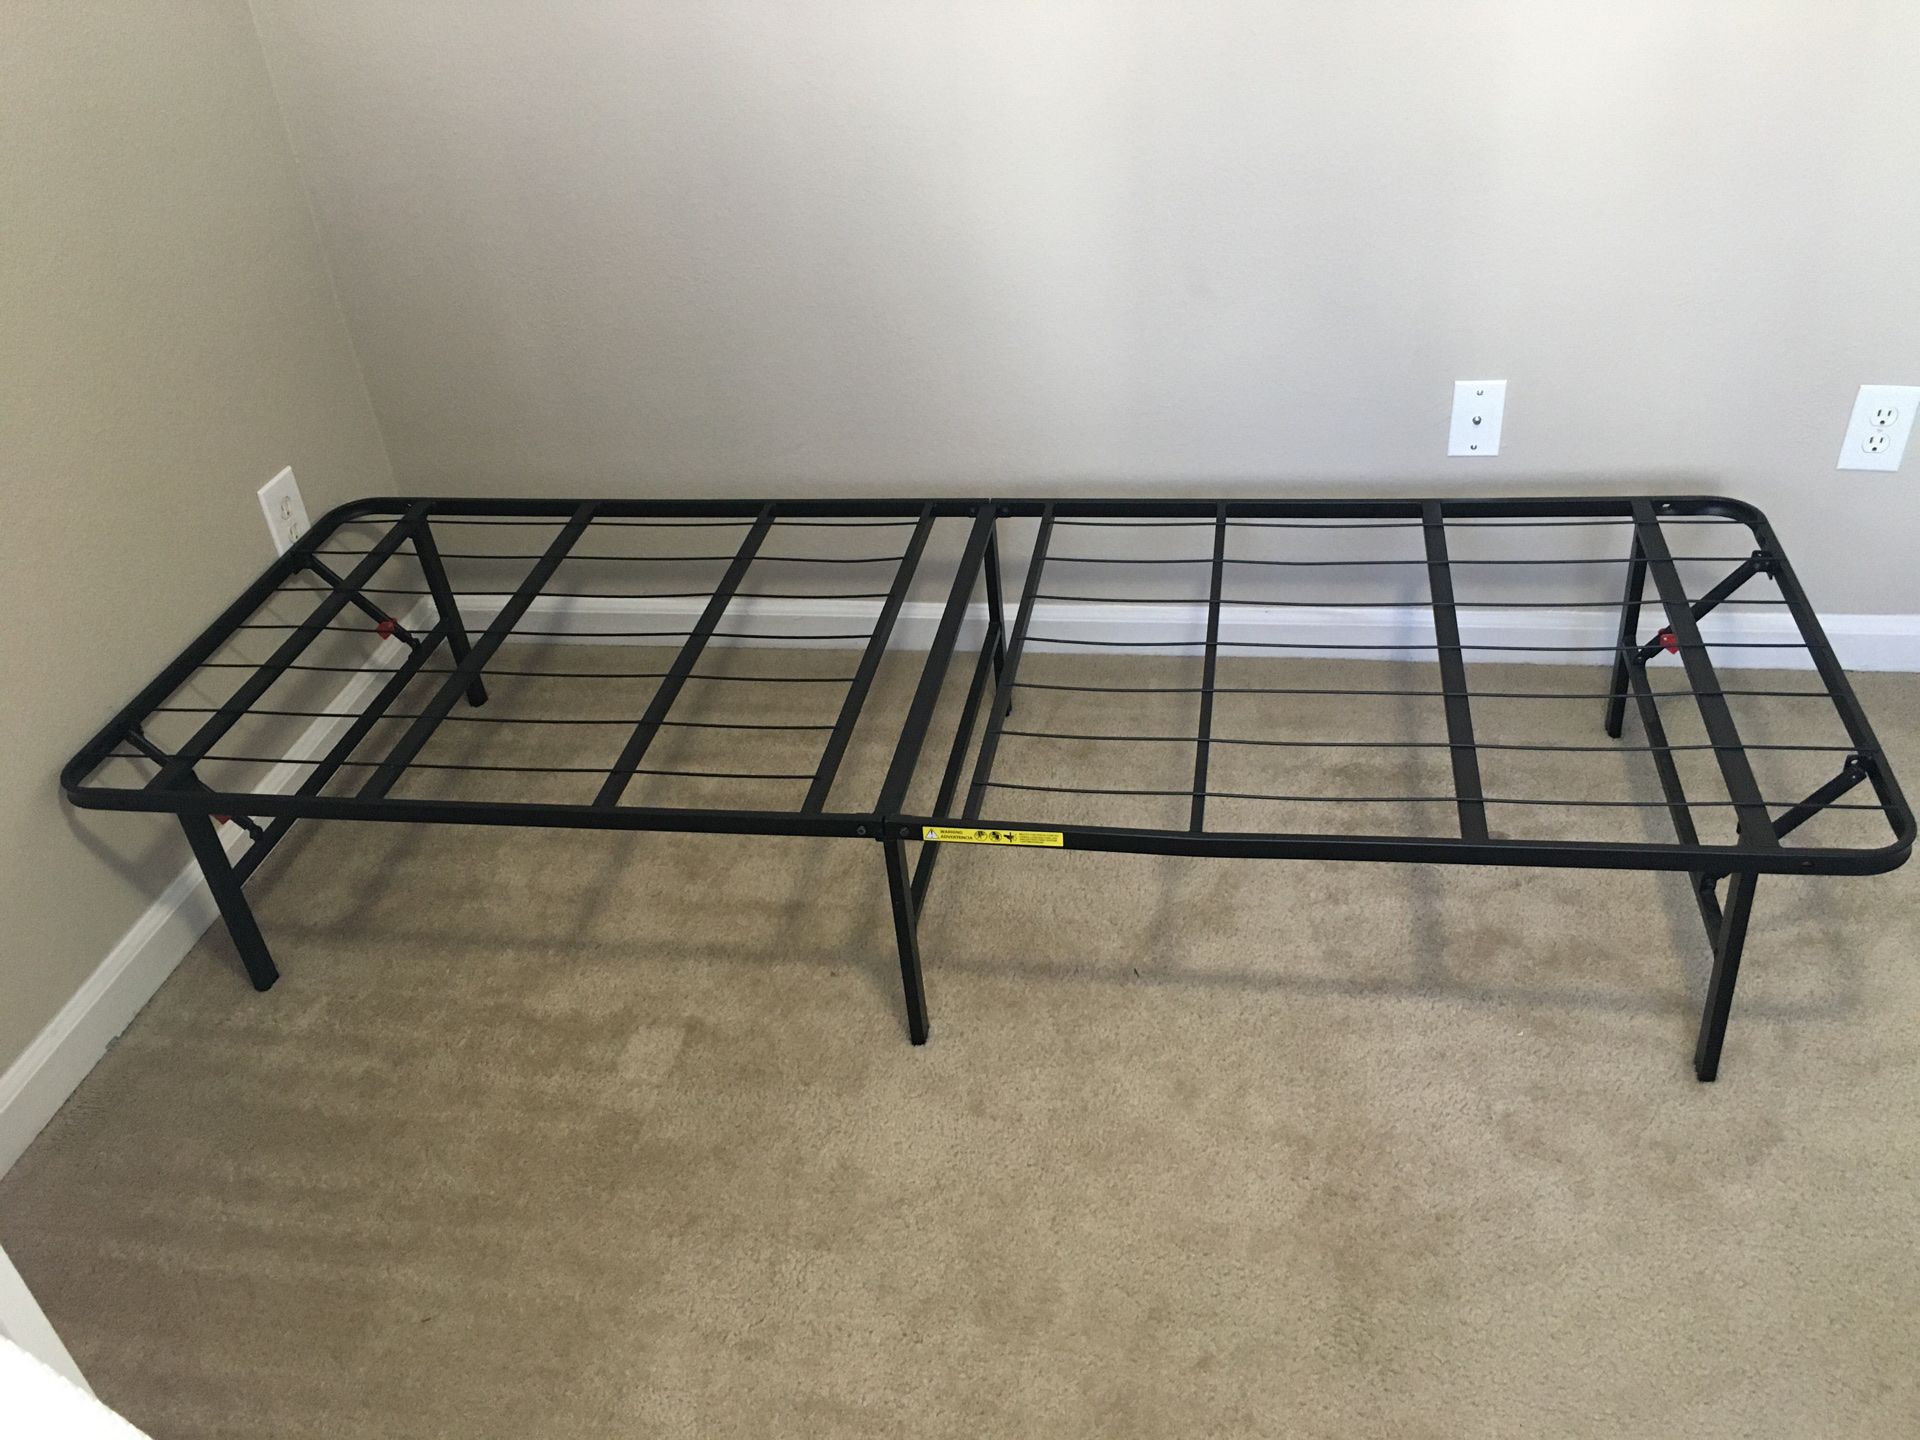 Twin xl bed frame. Folds and closes for easy storage and moving. No need to assemble. Just unfold and its ready to sleep on.